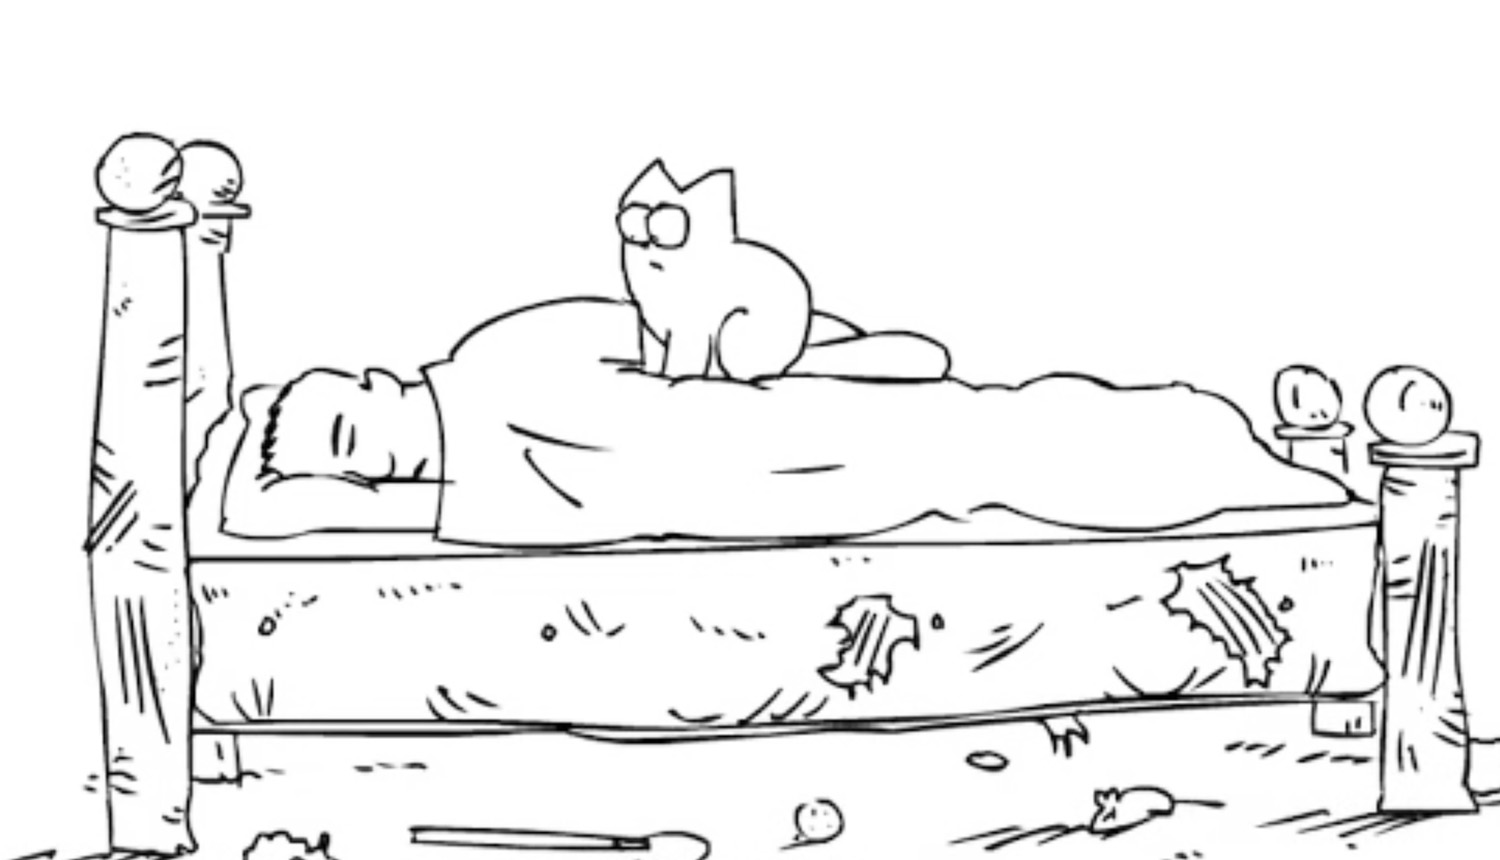 Simon's Cat - Plugged In